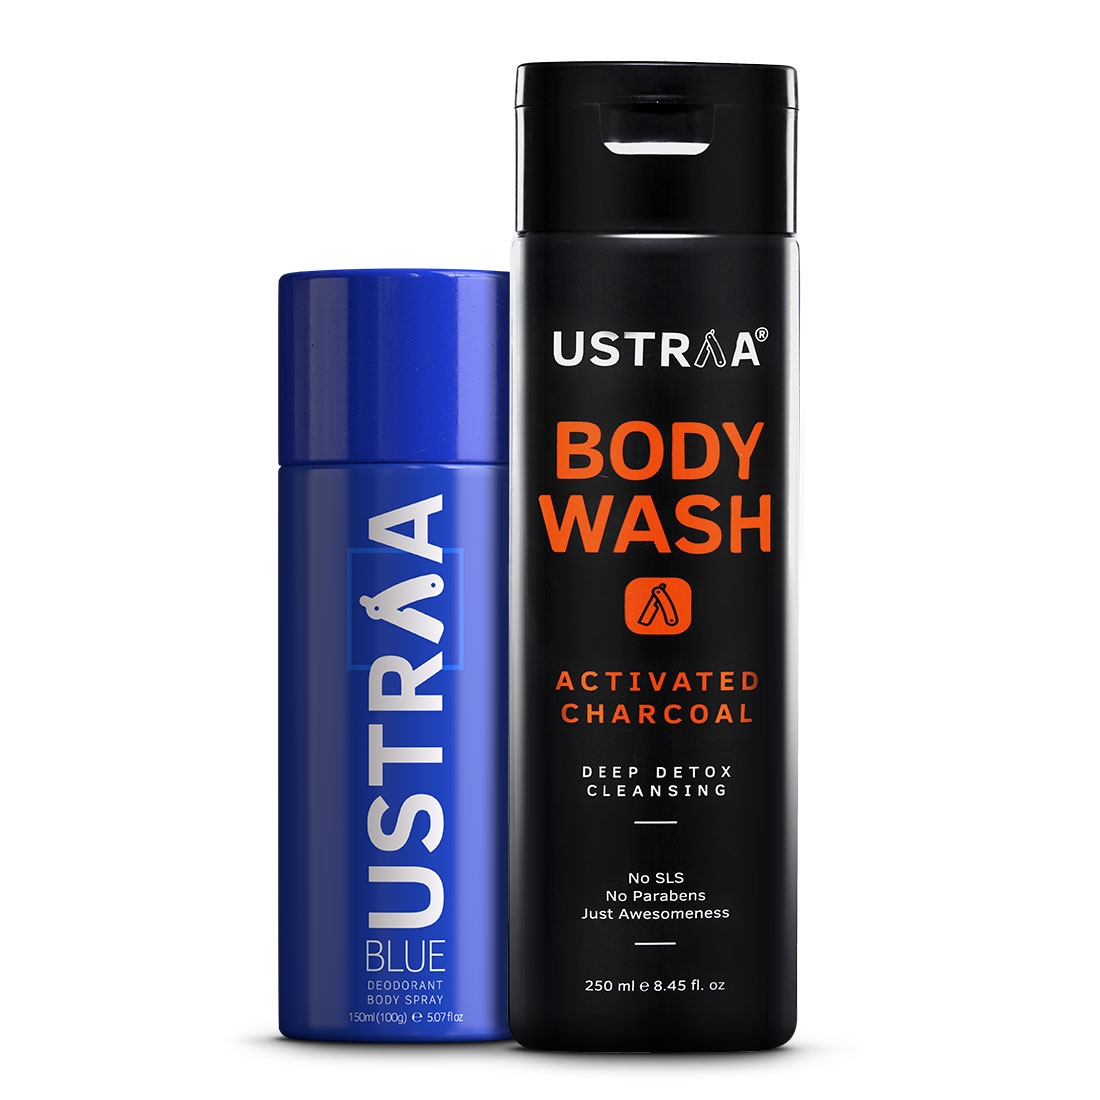 Ustraa Blue Deodorant 150ml & Body Wash Activated Charcoal 200g